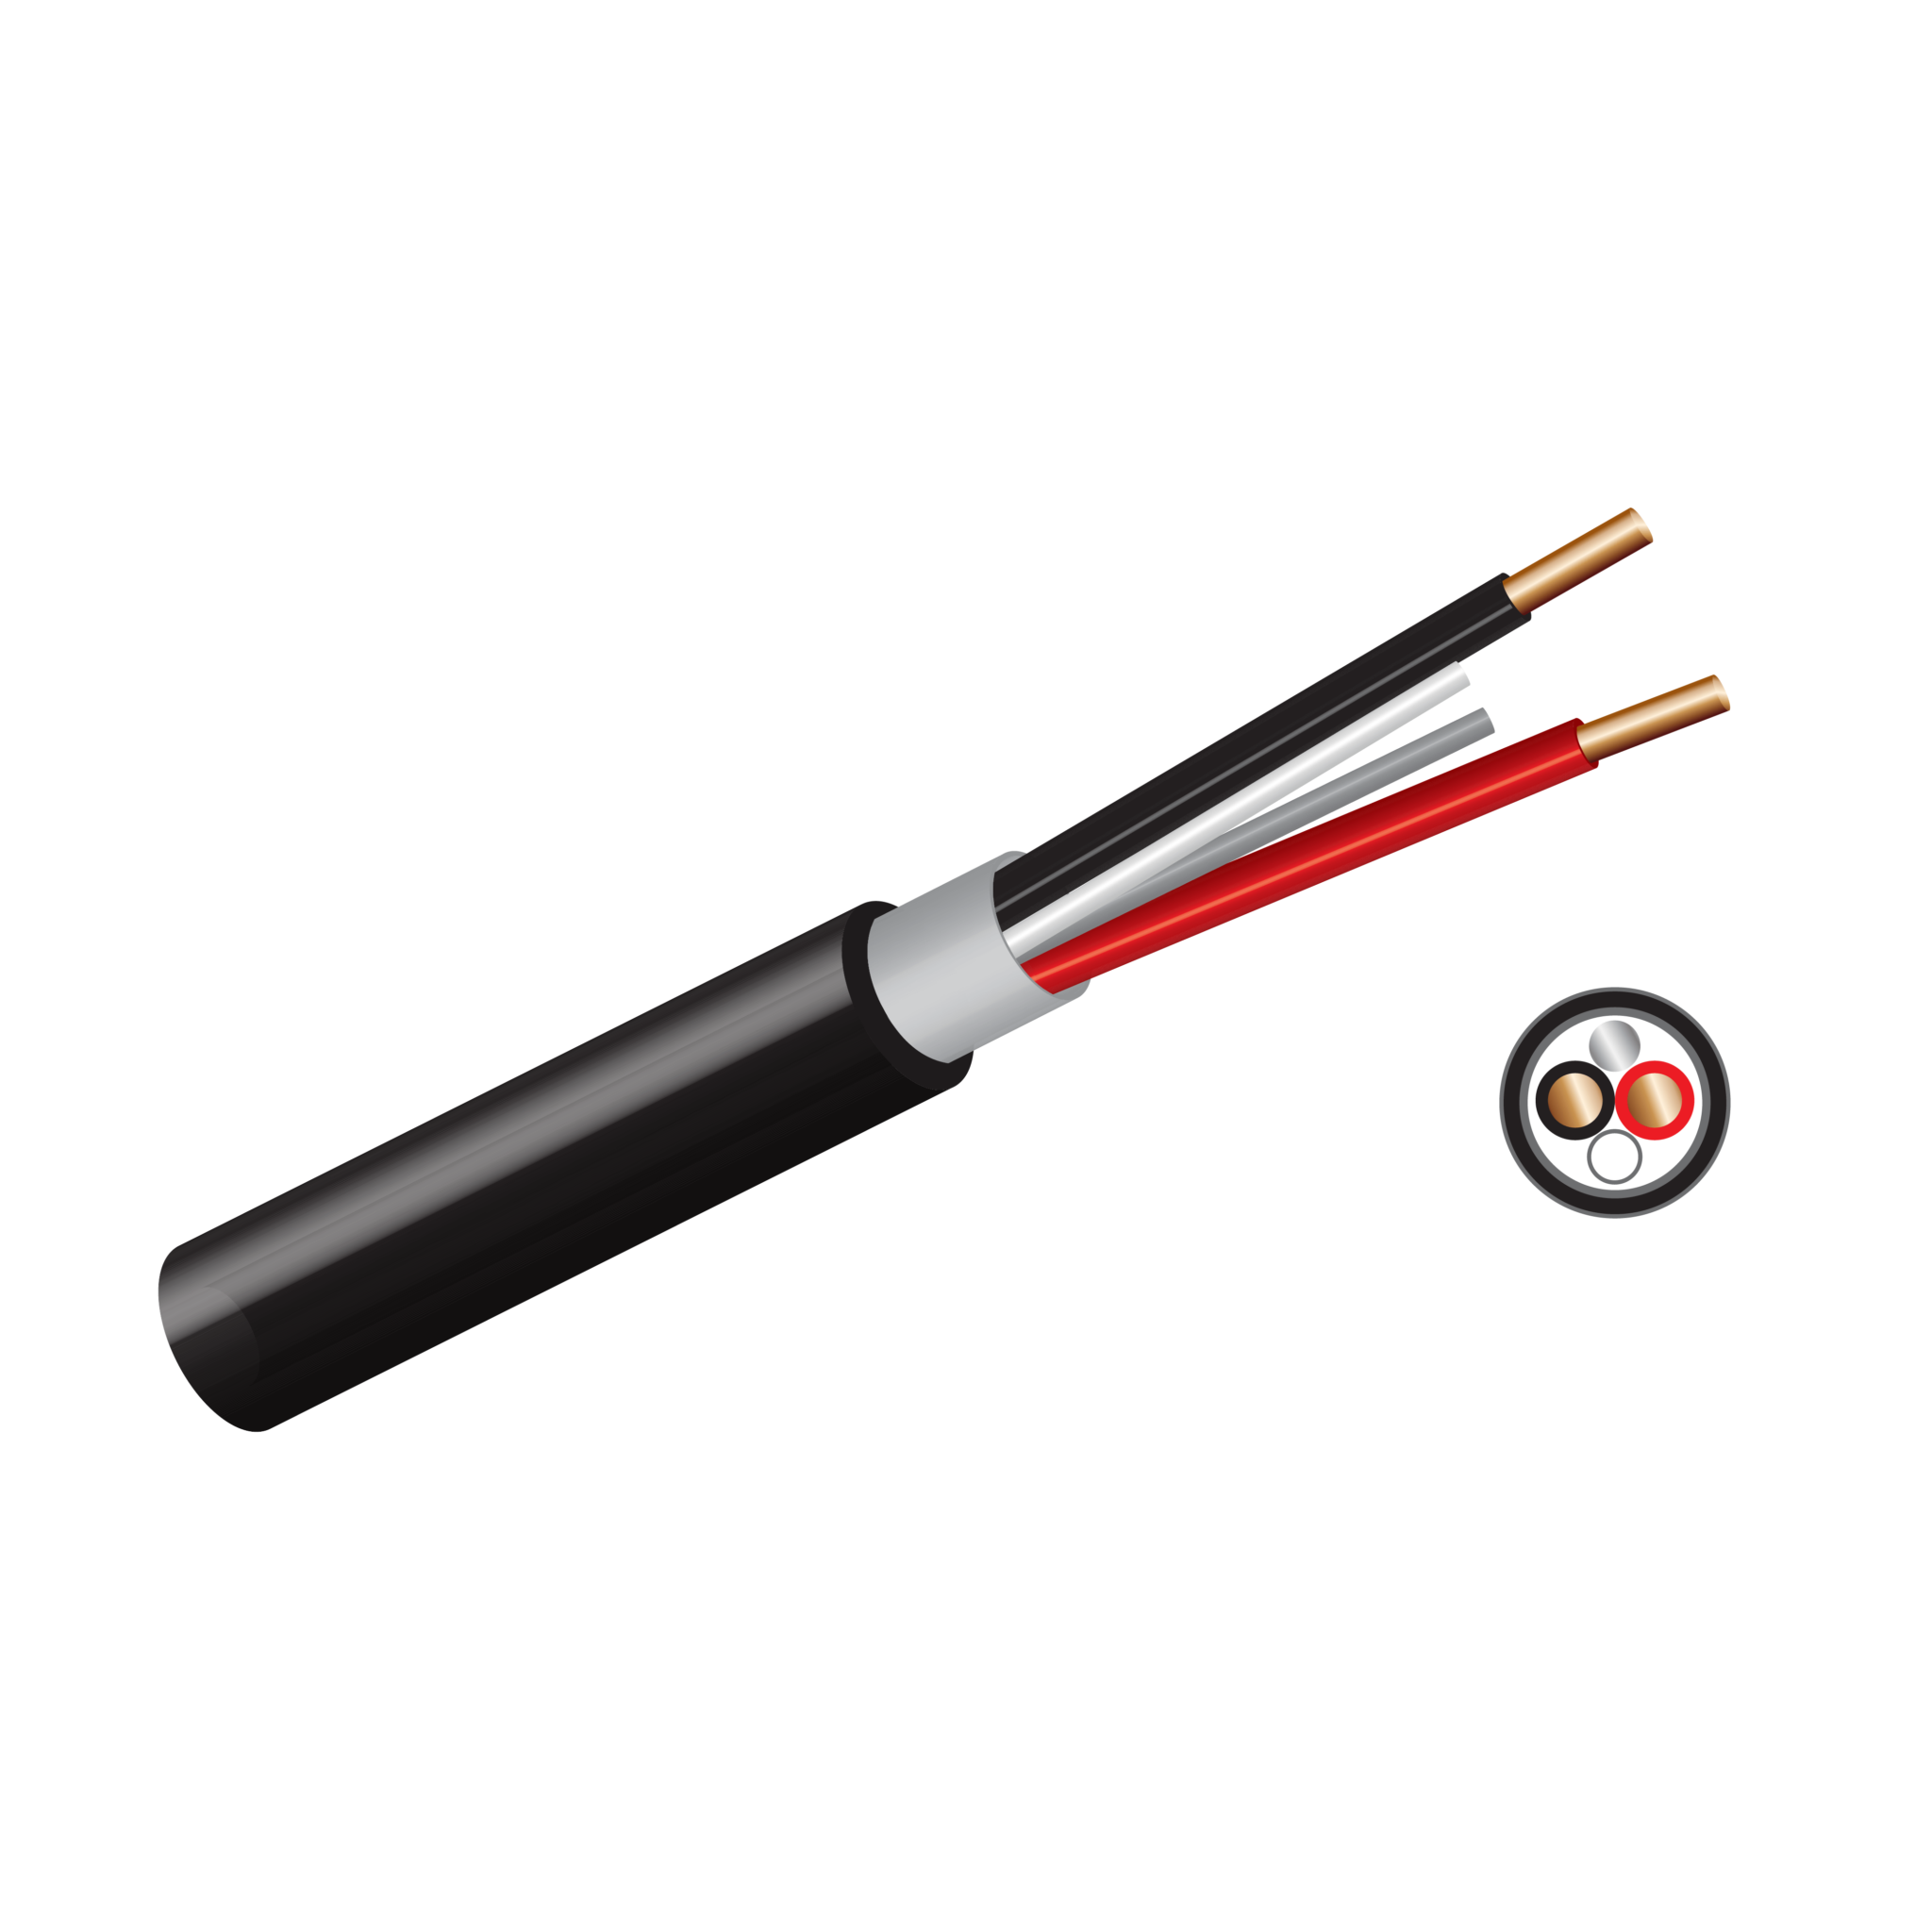 Surfix Cable - Black 1.5mm 2 Core + Earth (Launch Special)